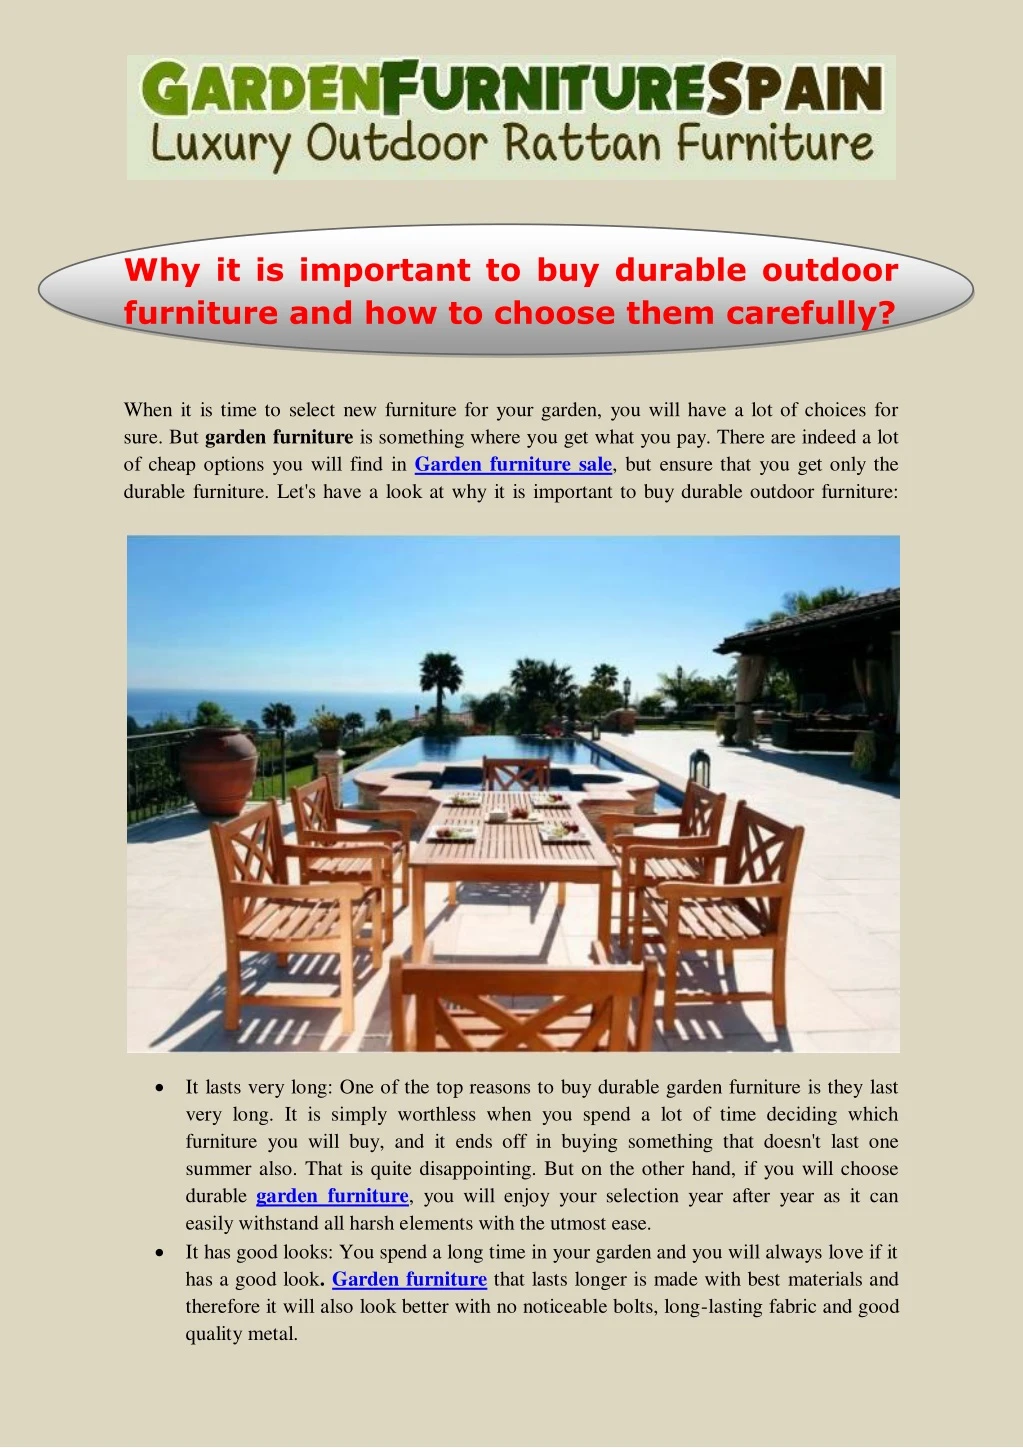 why it is important to buy durable outdoor